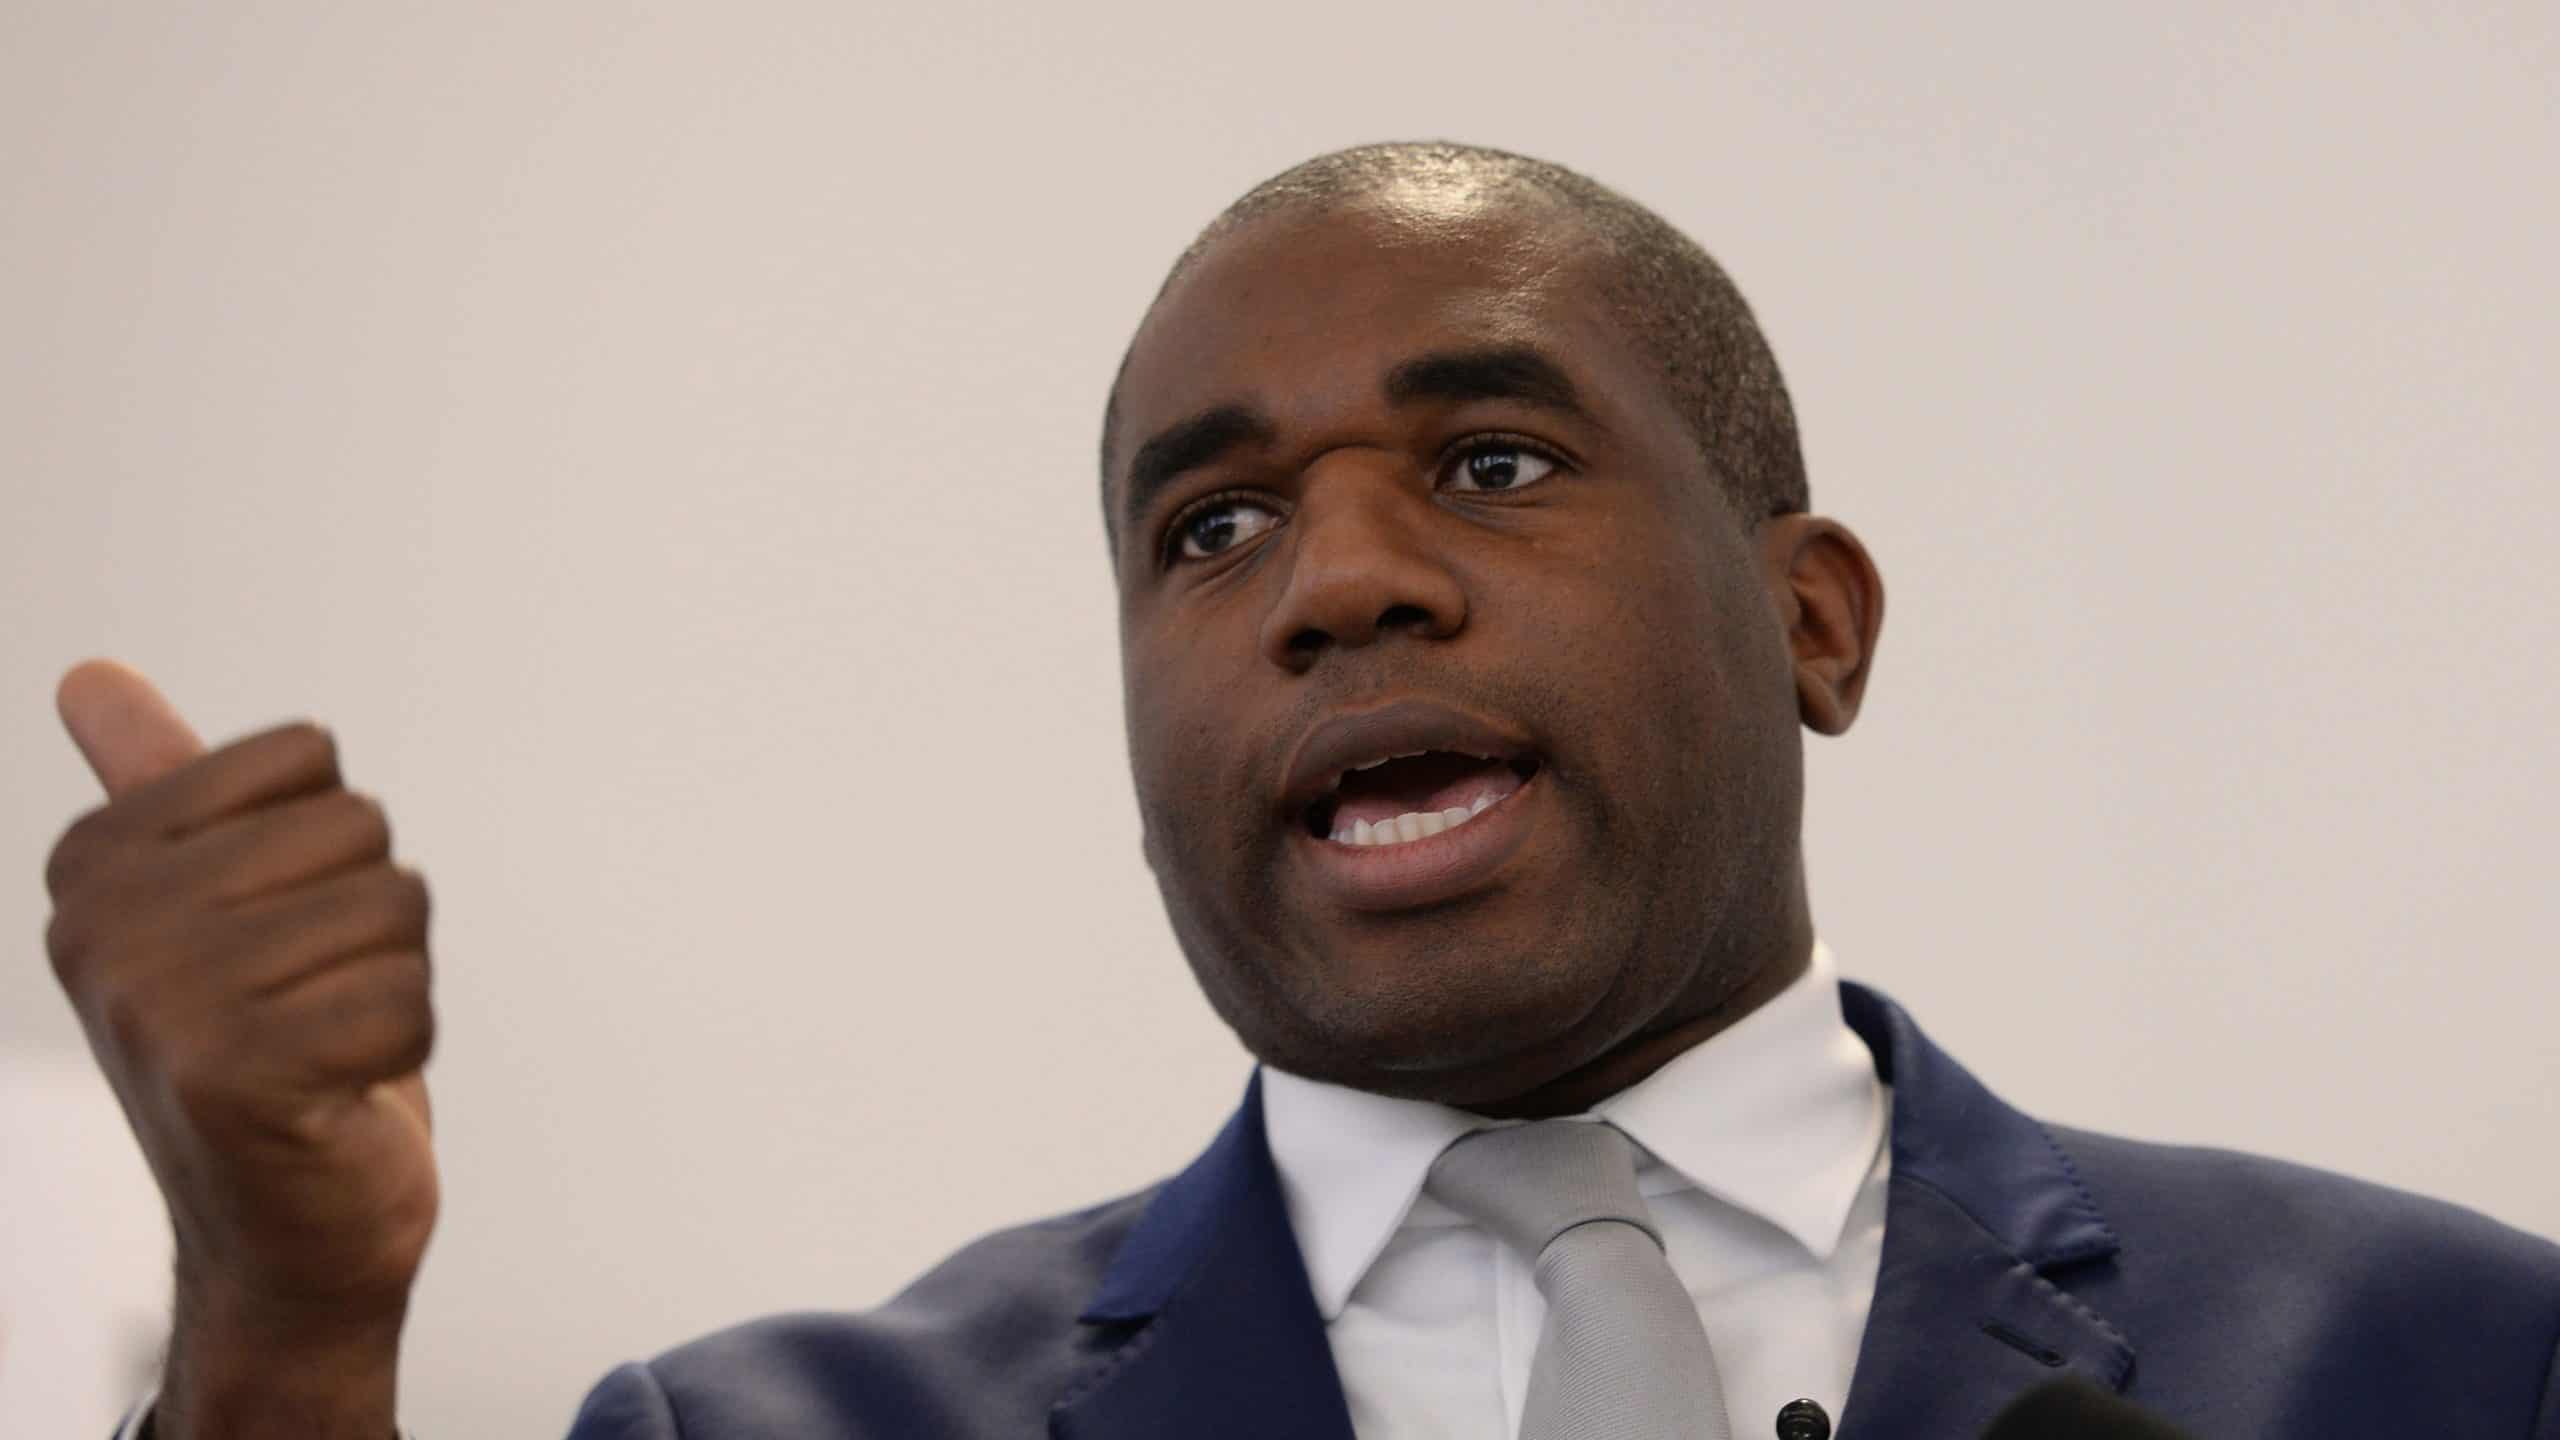 David Lammy says racist Twitter post raises ‘serious questions’ for Tories